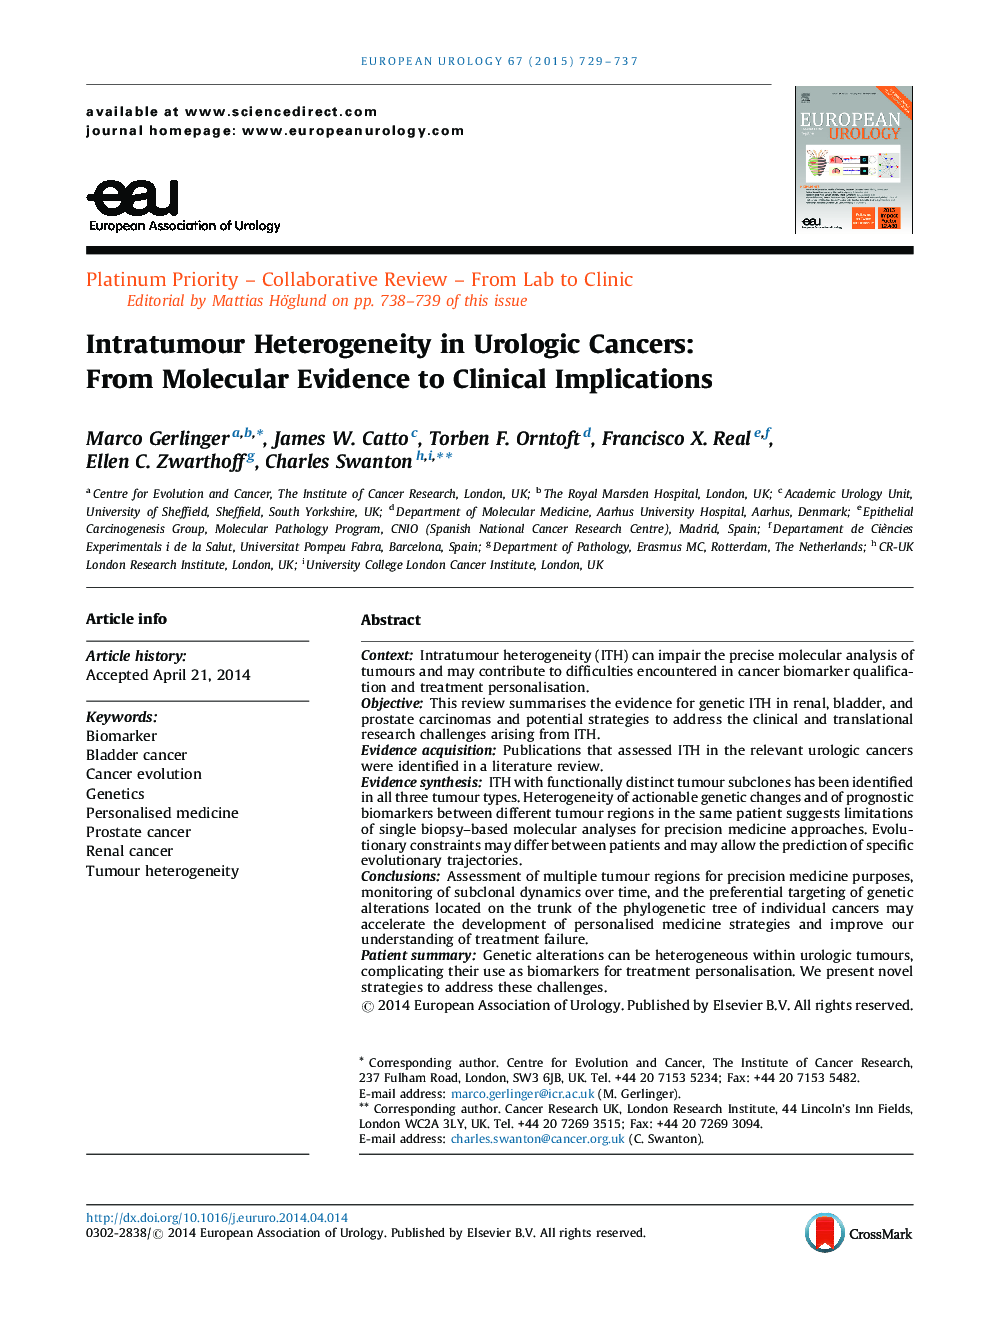 Intratumour Heterogeneity in Urologic Cancers: From Molecular Evidence to Clinical Implications